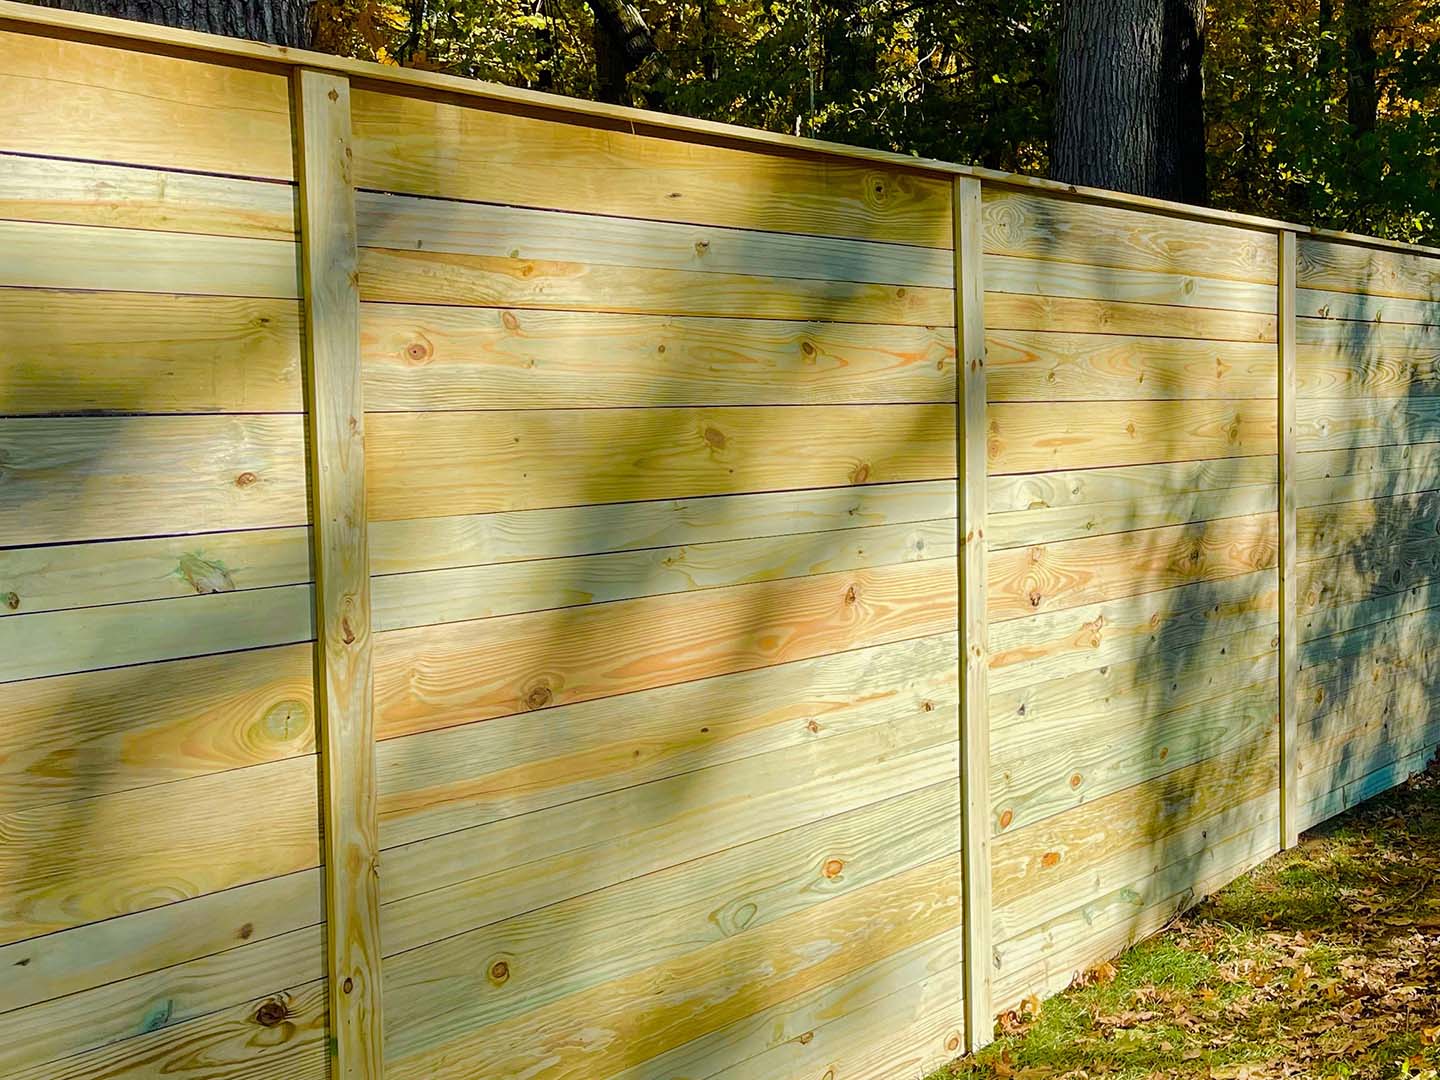 Kouts IN horizontal style wood fence